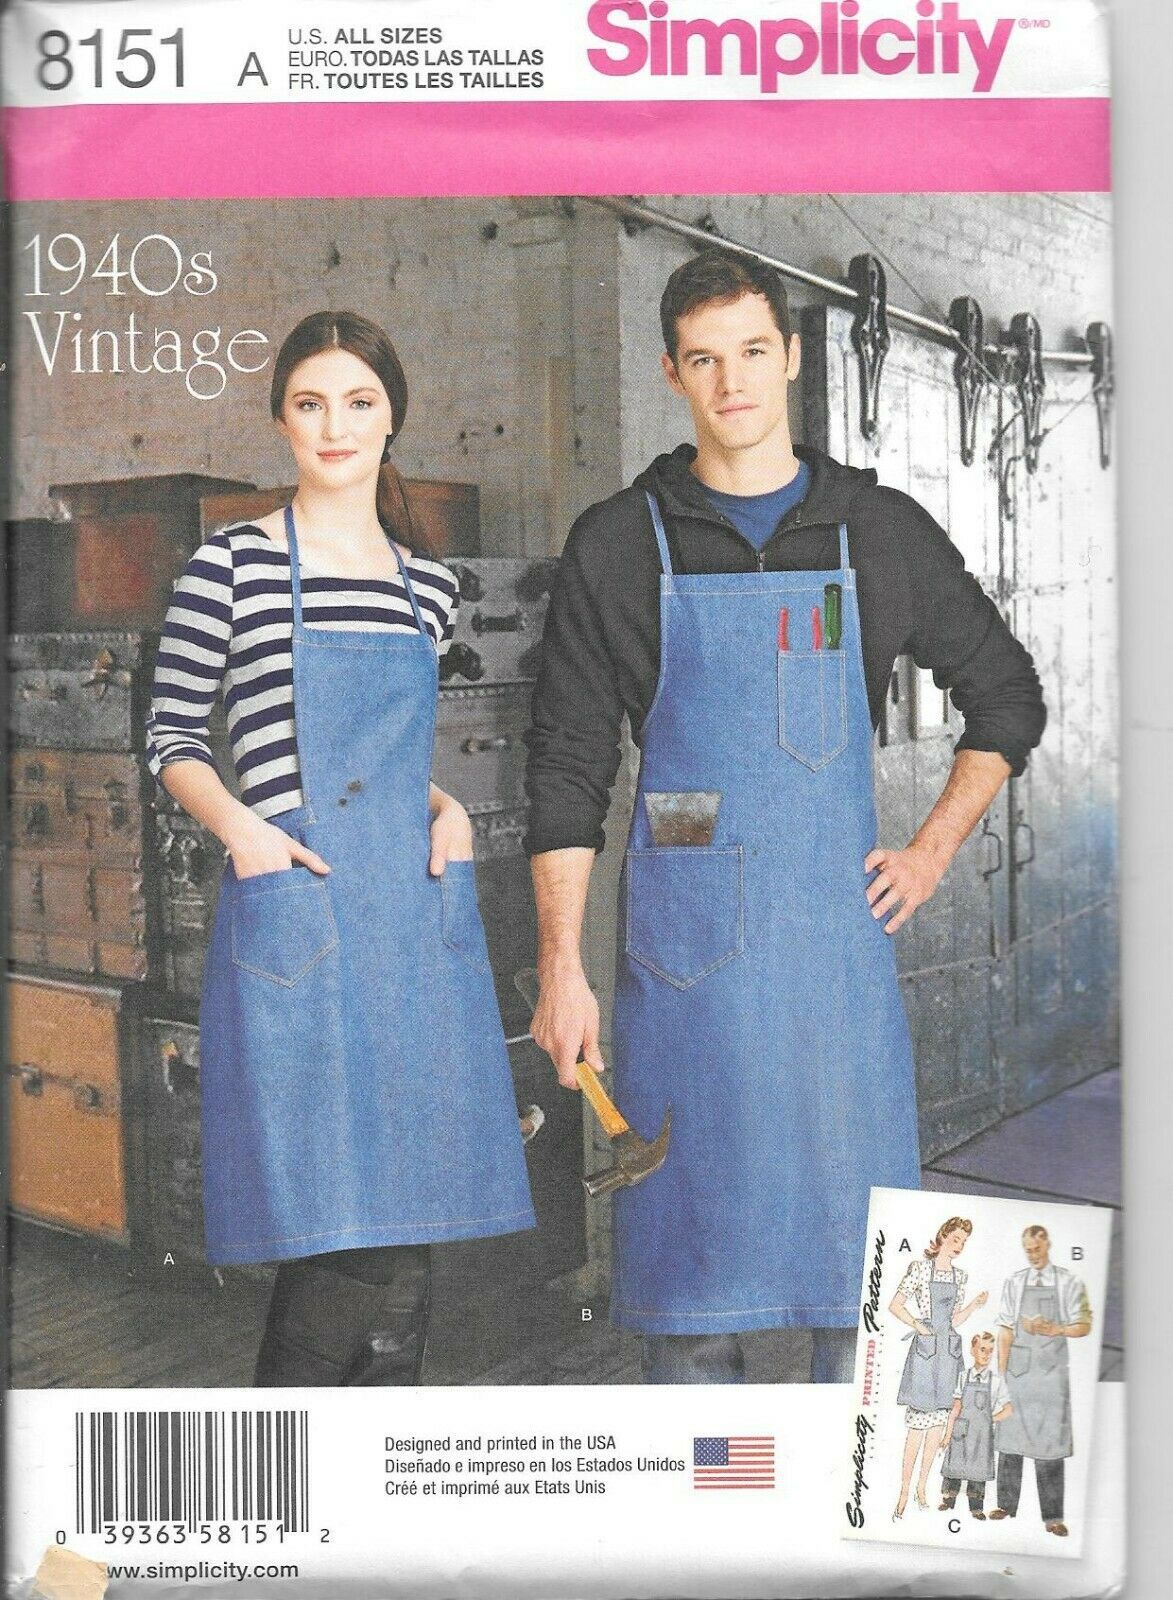 Primary image for Simplicity #8151 Vintage 1940s Style Misses' & Mens' Apron - OS - UNCUT